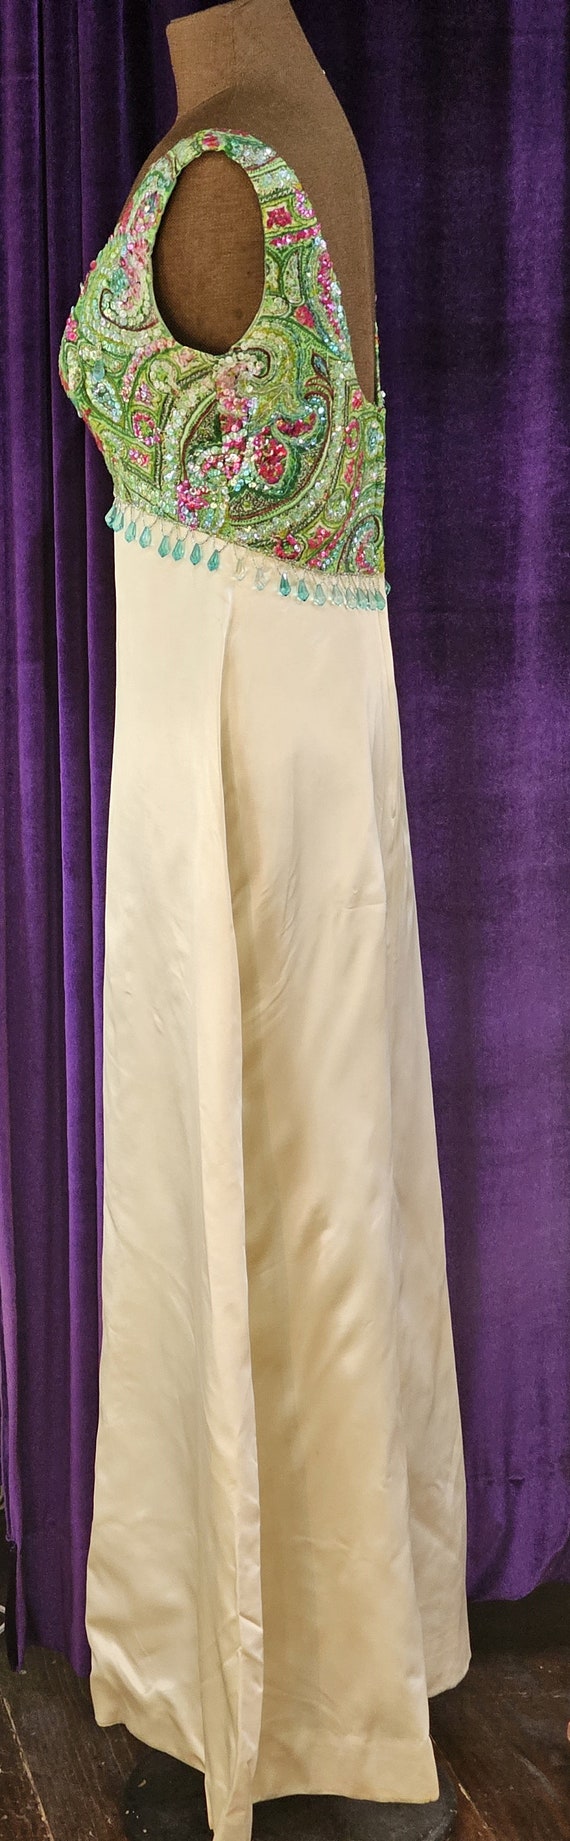 1970s Vintage Cream Satin Gown with Green Top Emm… - image 3